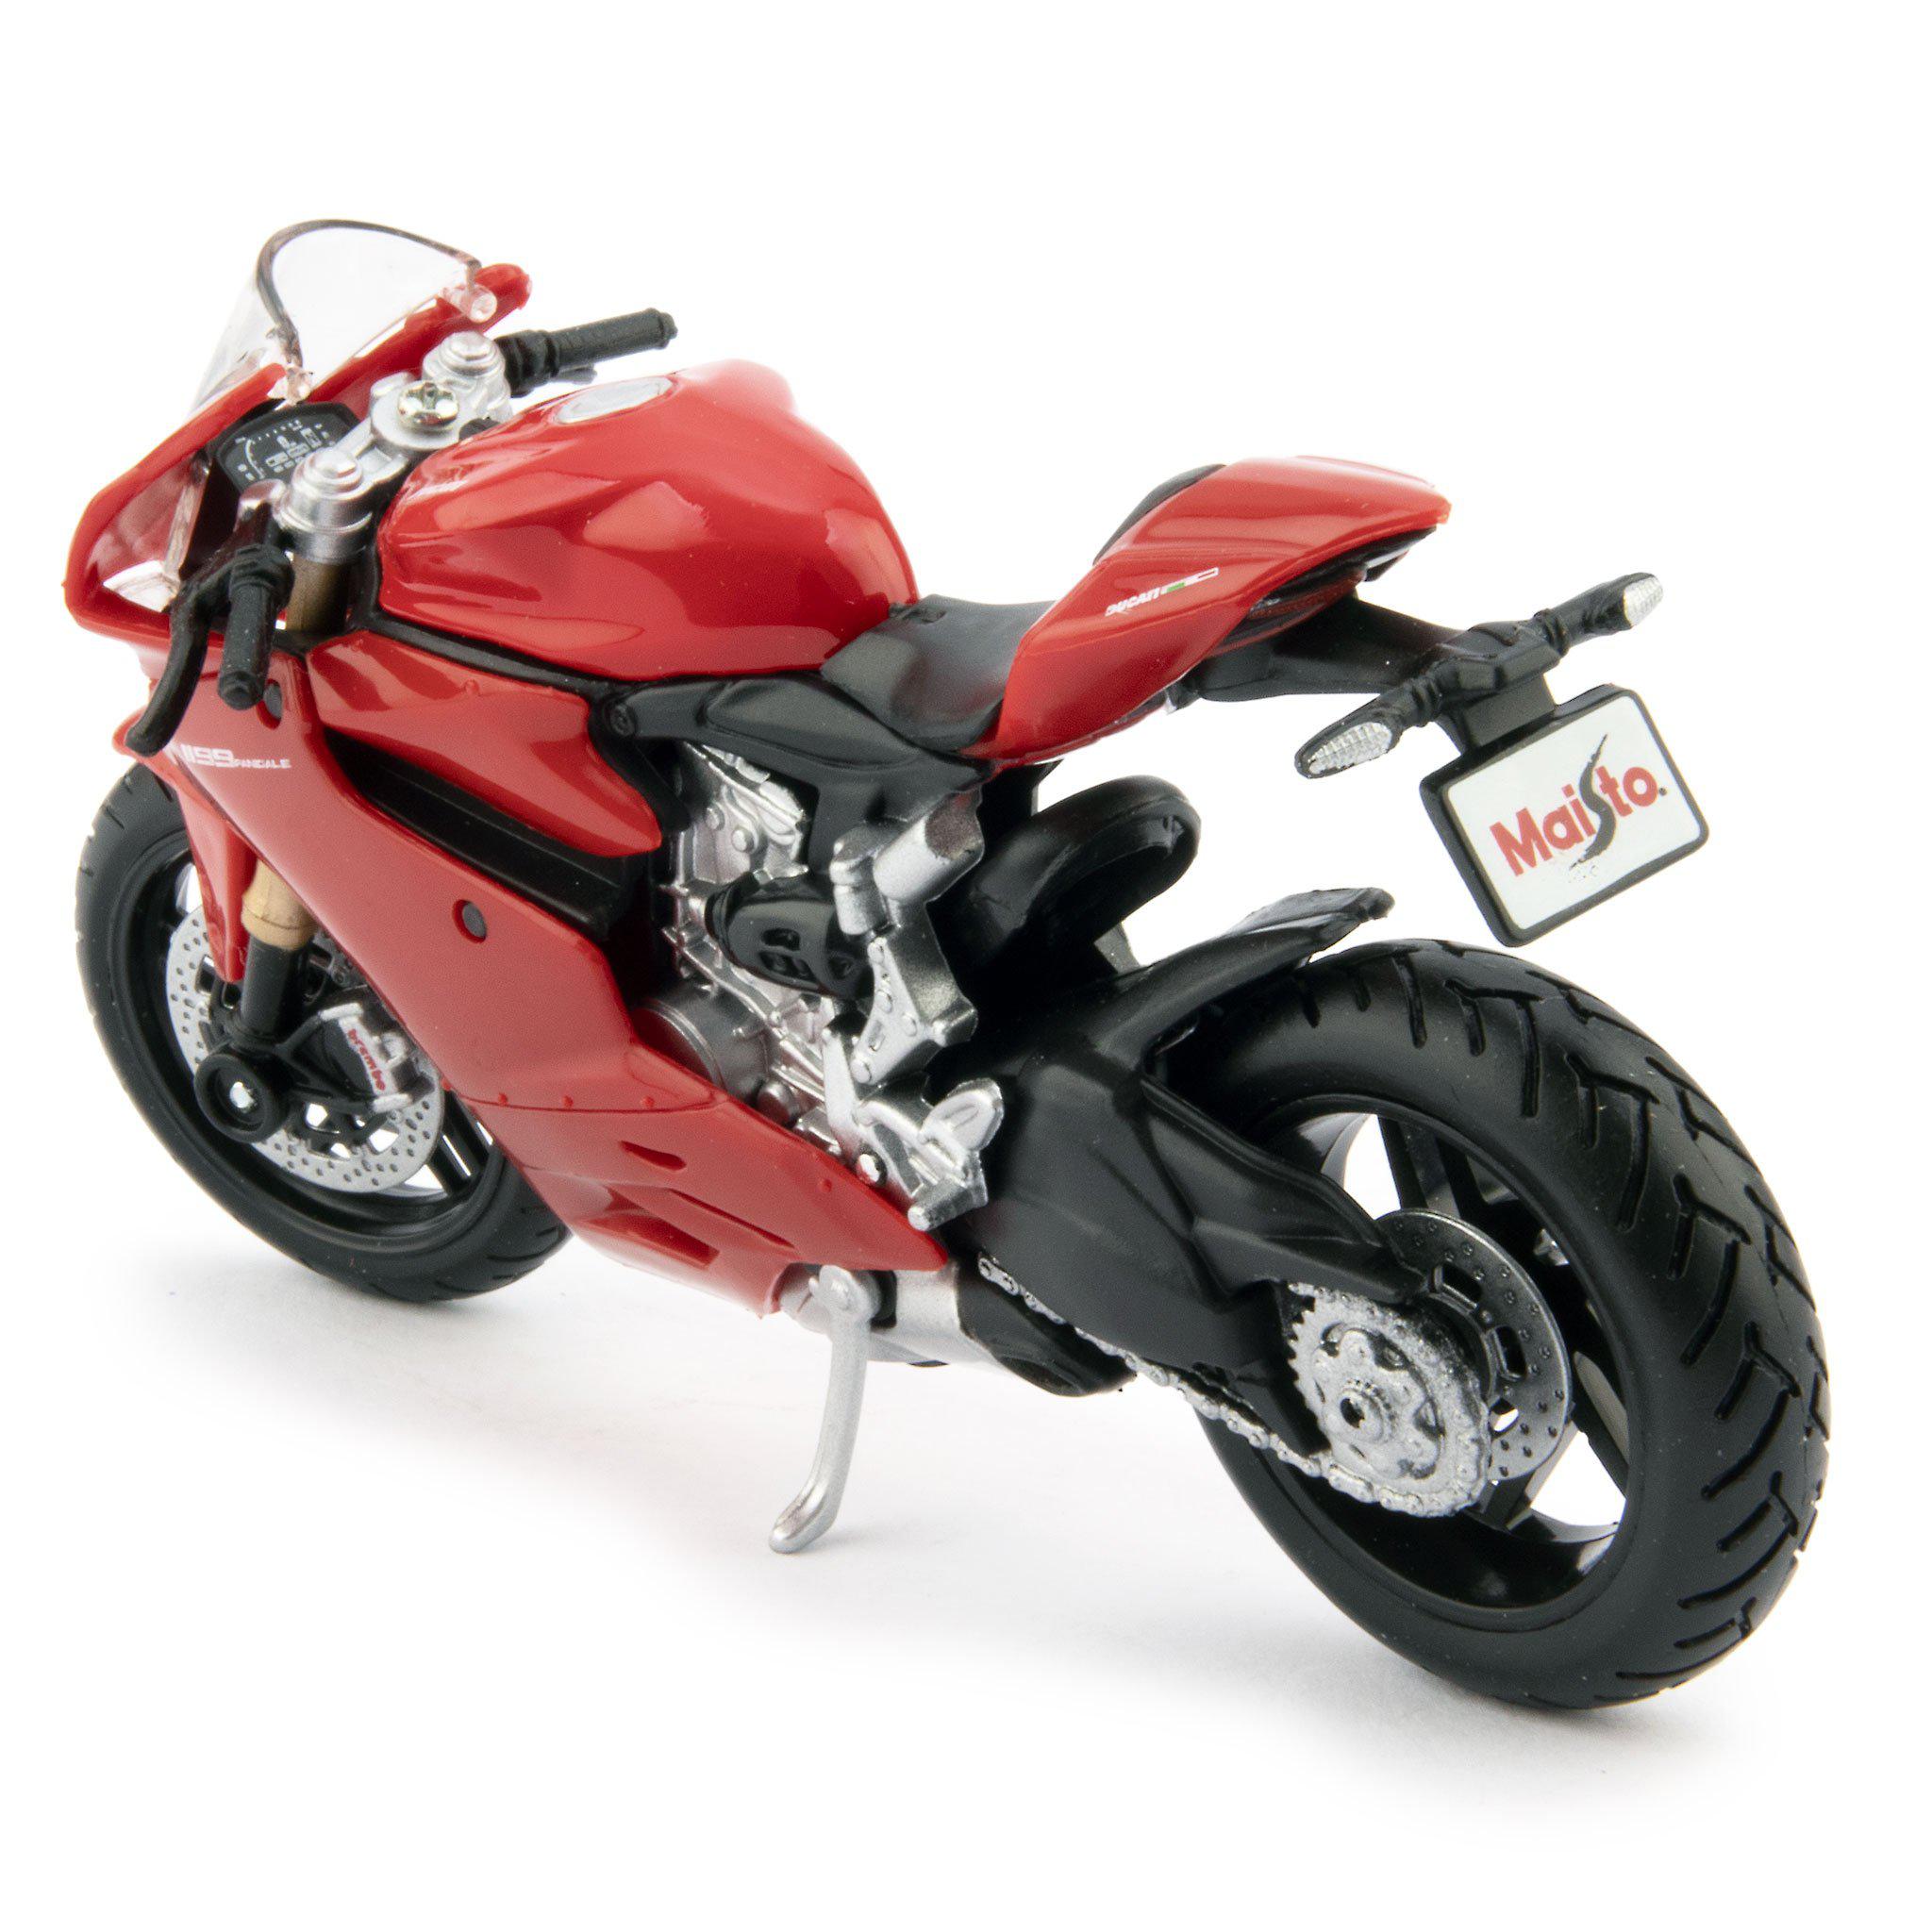 Ducati 1199 Panigale Diecast Model Motorcycle red - 1:18 scale-Maisto-Diecast Model Centre